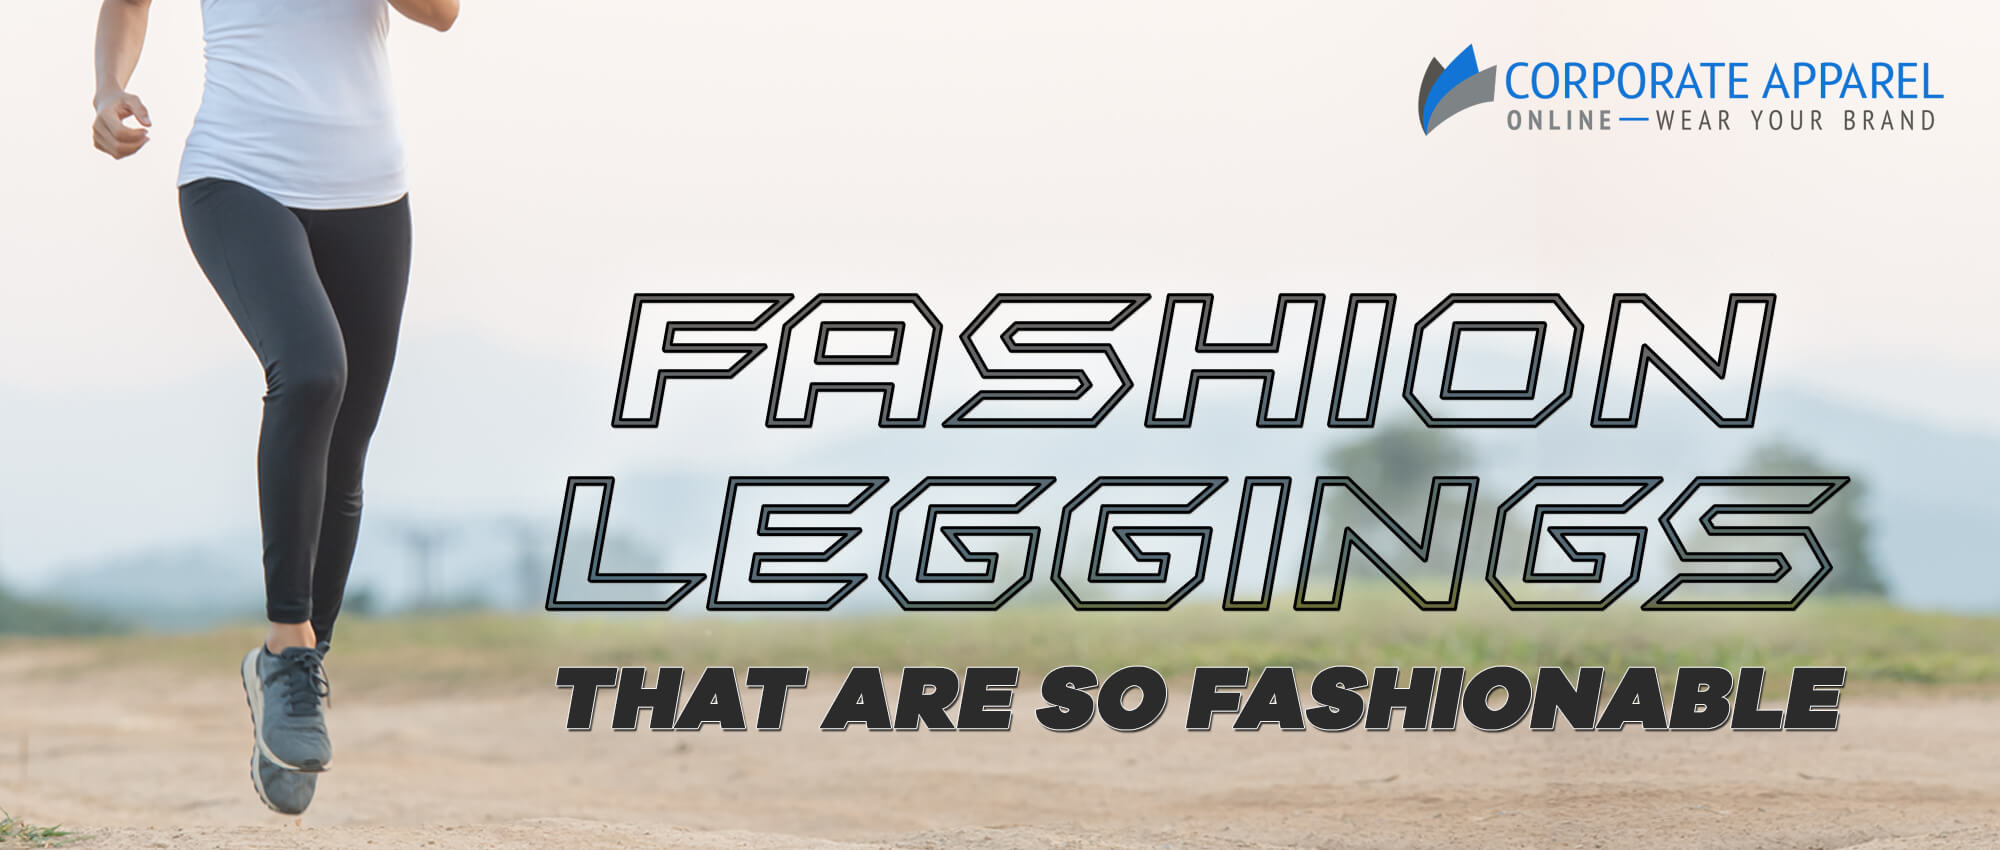 FASHION LEGGINGS THAT ARE SO FASHIONABLE – Corporate Apparel Online